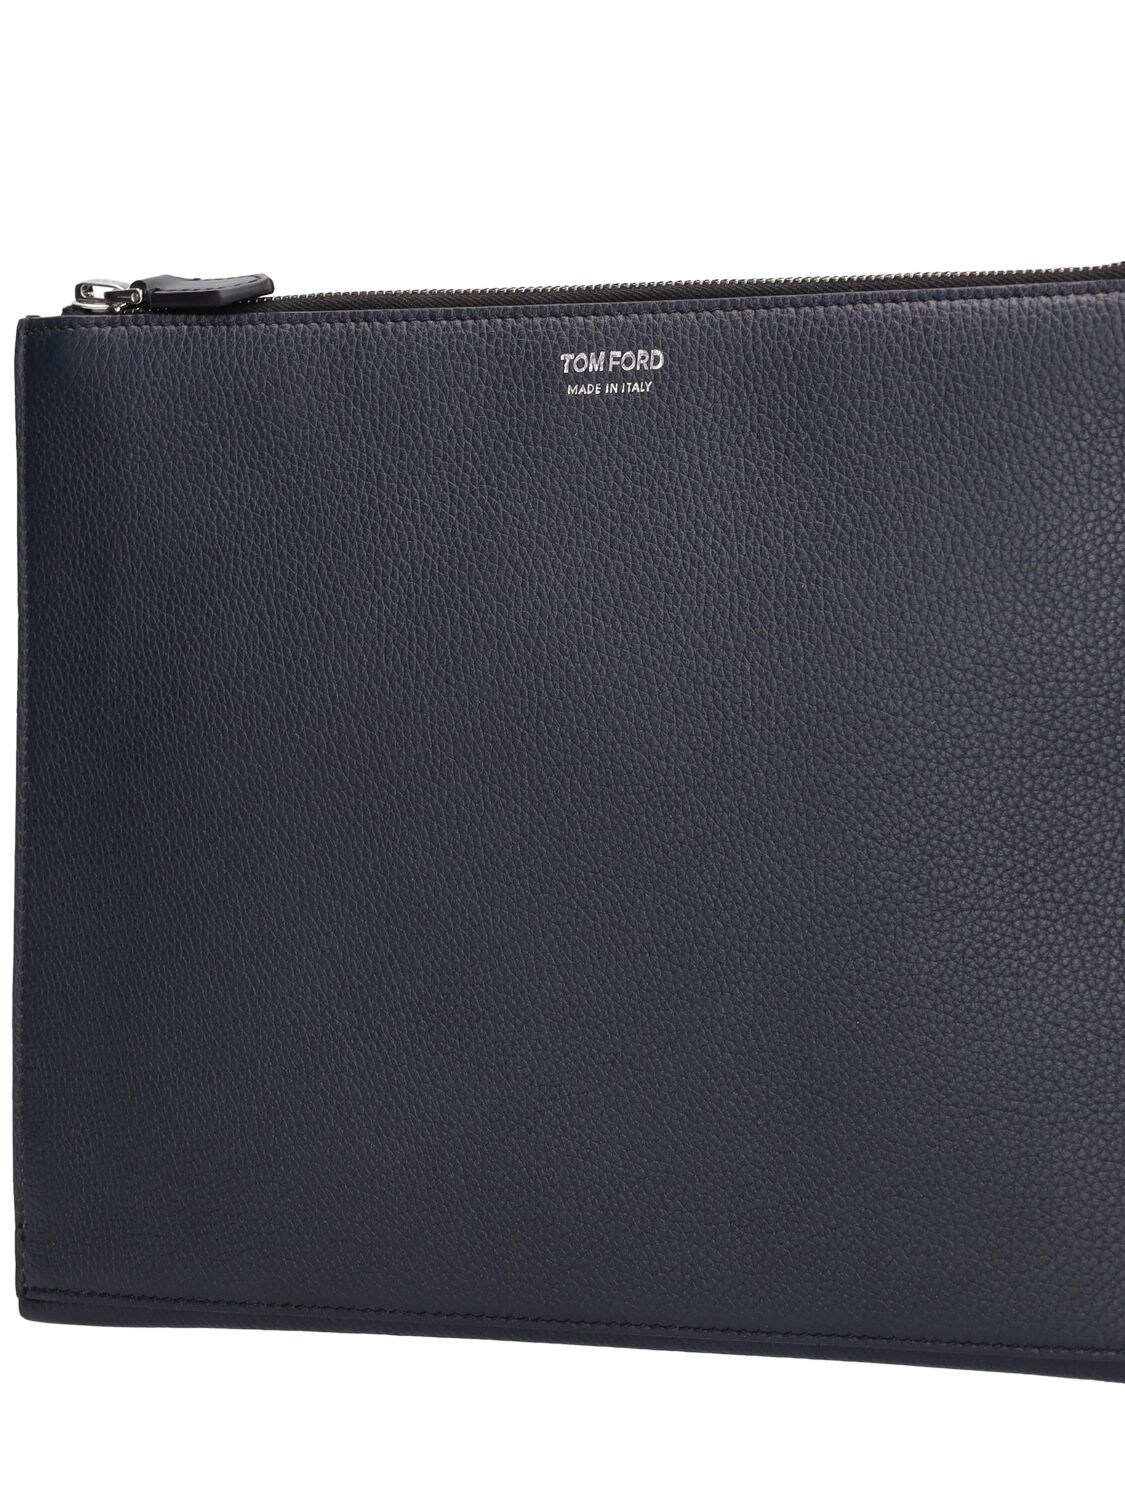 Utility Leather Trimmed Pouch in Black - Tom Ford